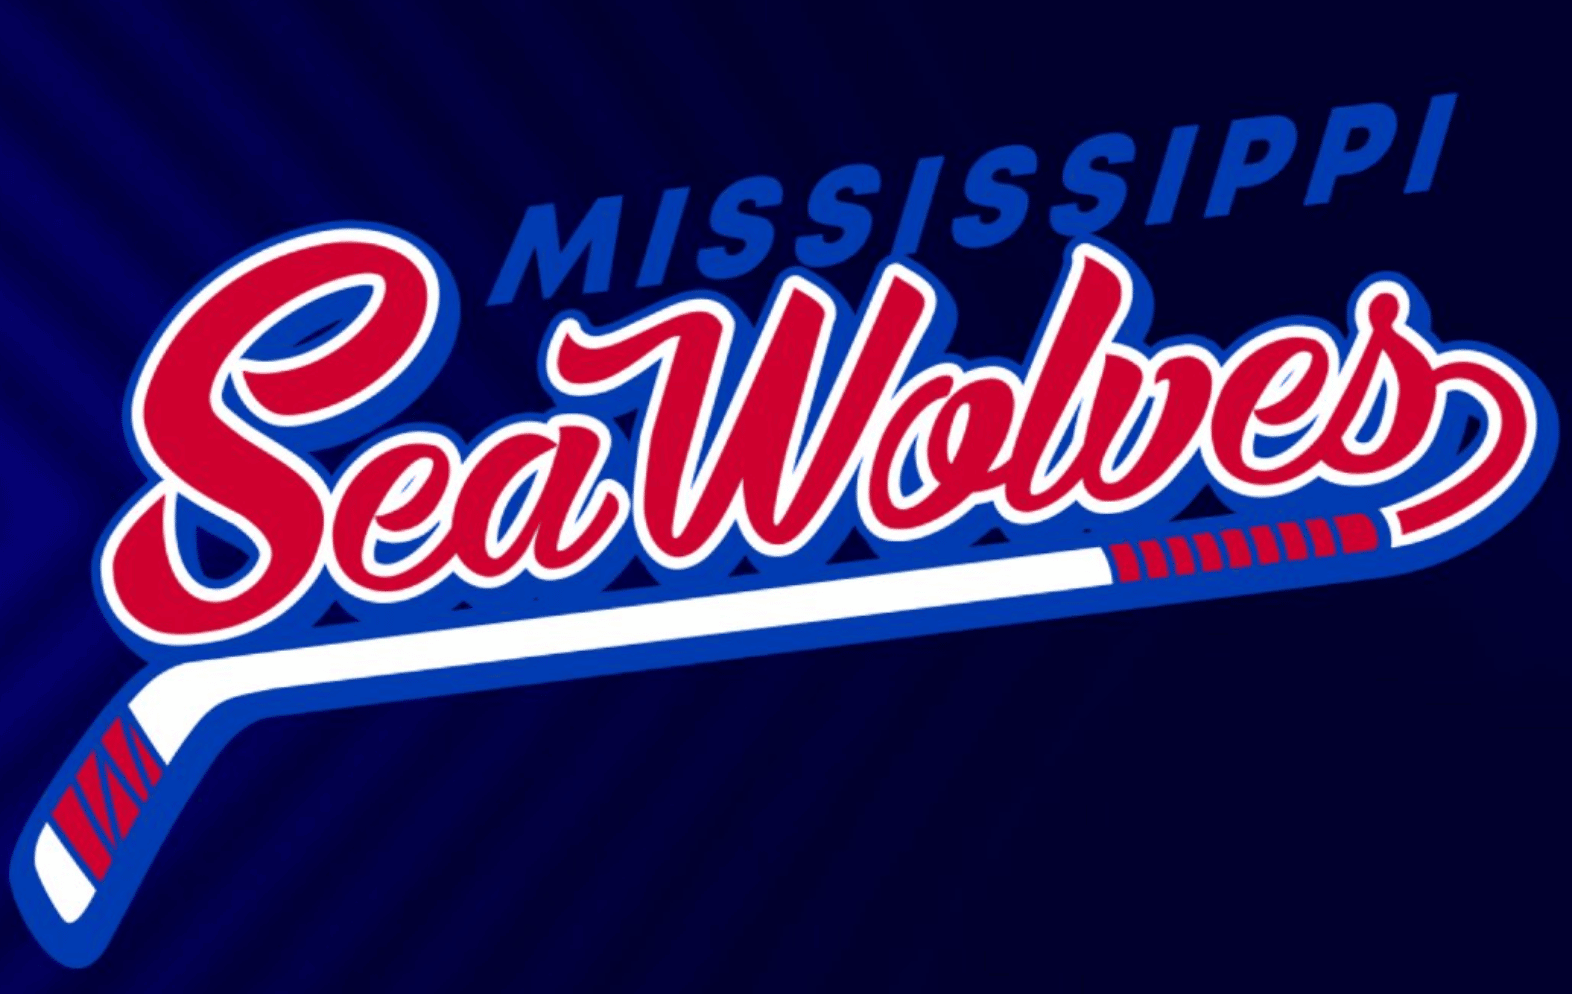 News: SEA WOLVES ANNOUNCE 2022-23 TRY OUT CAMP - Mississippi Sea